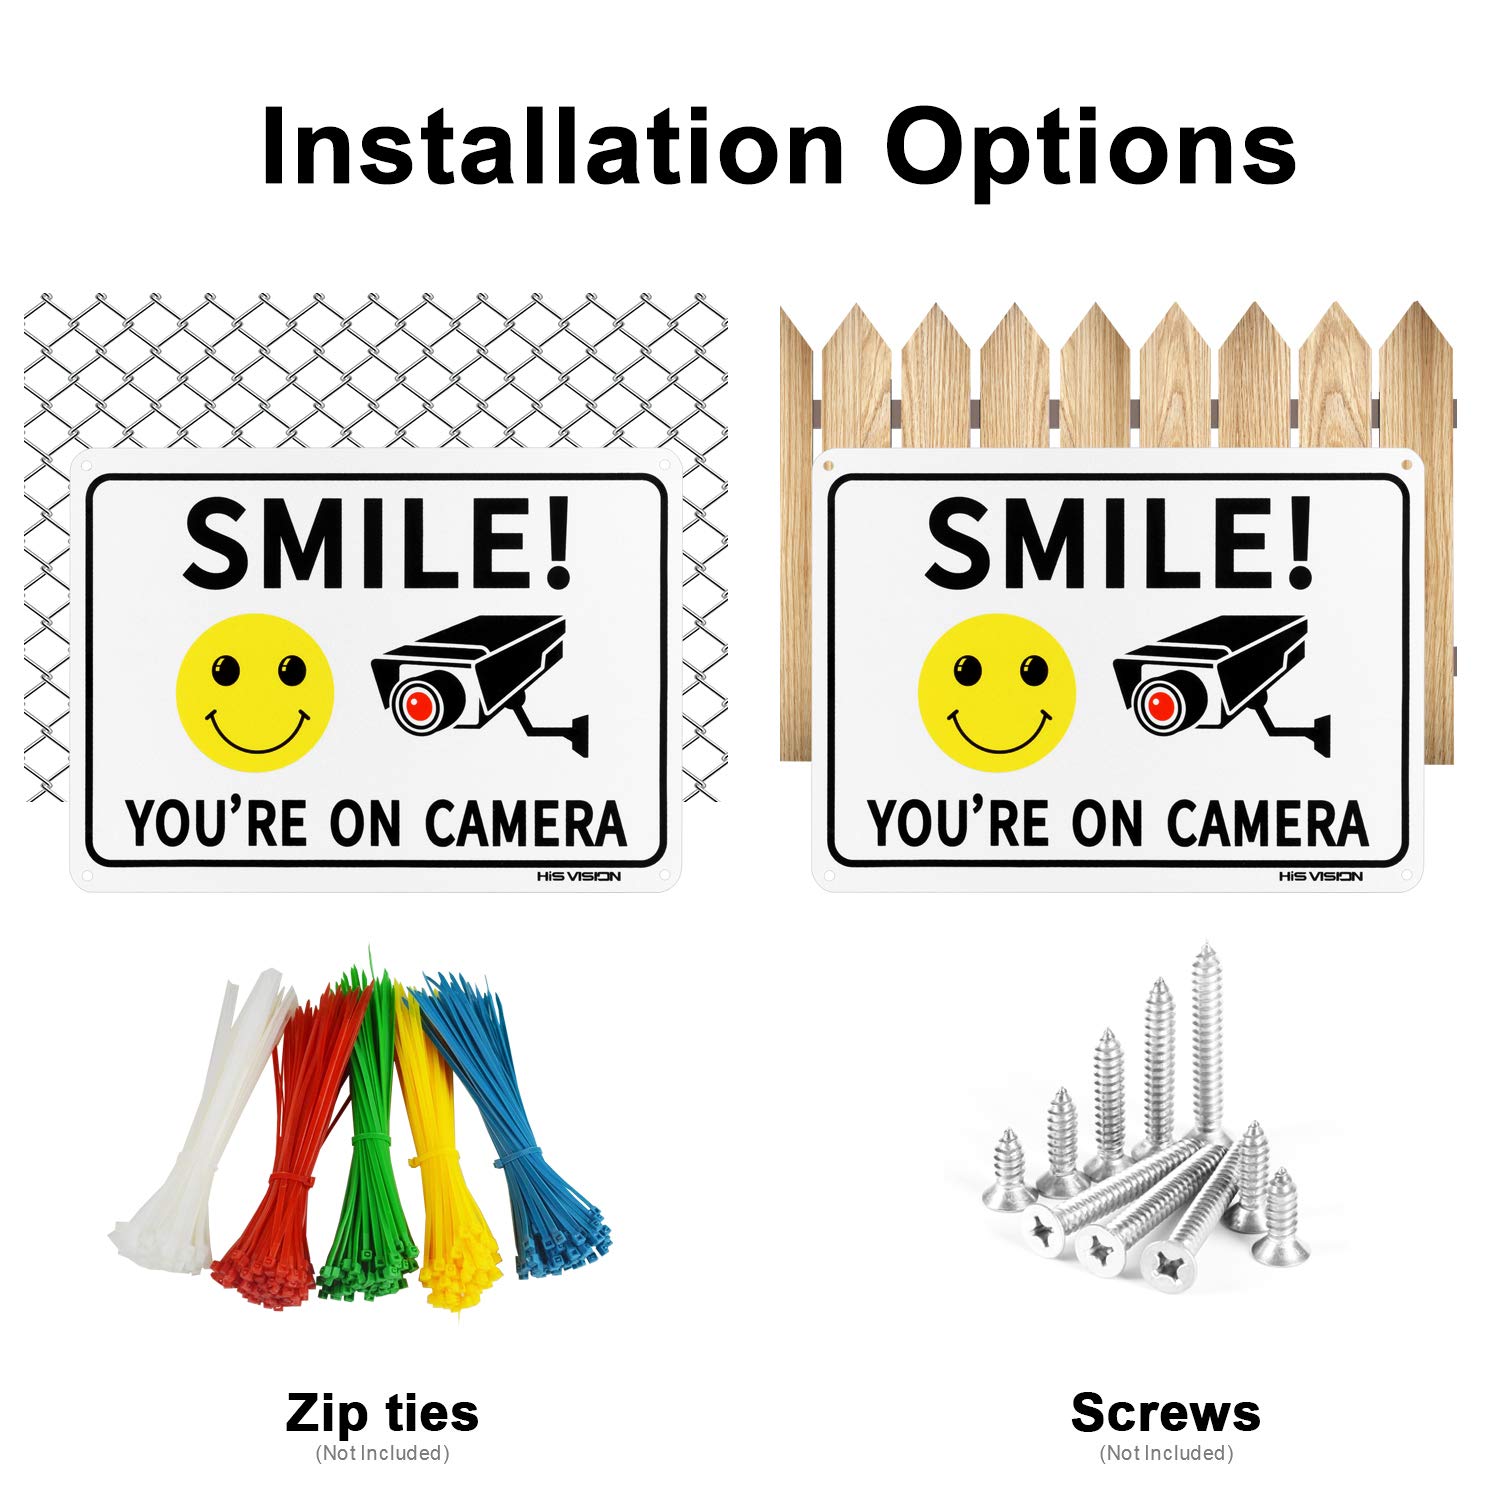 HISVISION 2 Pack Smile You're on Camera, Video Surveillance Sign, 10"x7" Rust Free Aluminum Metal Warning Sign UVresistance, Waterproof, Easy to Install for Home House and Business